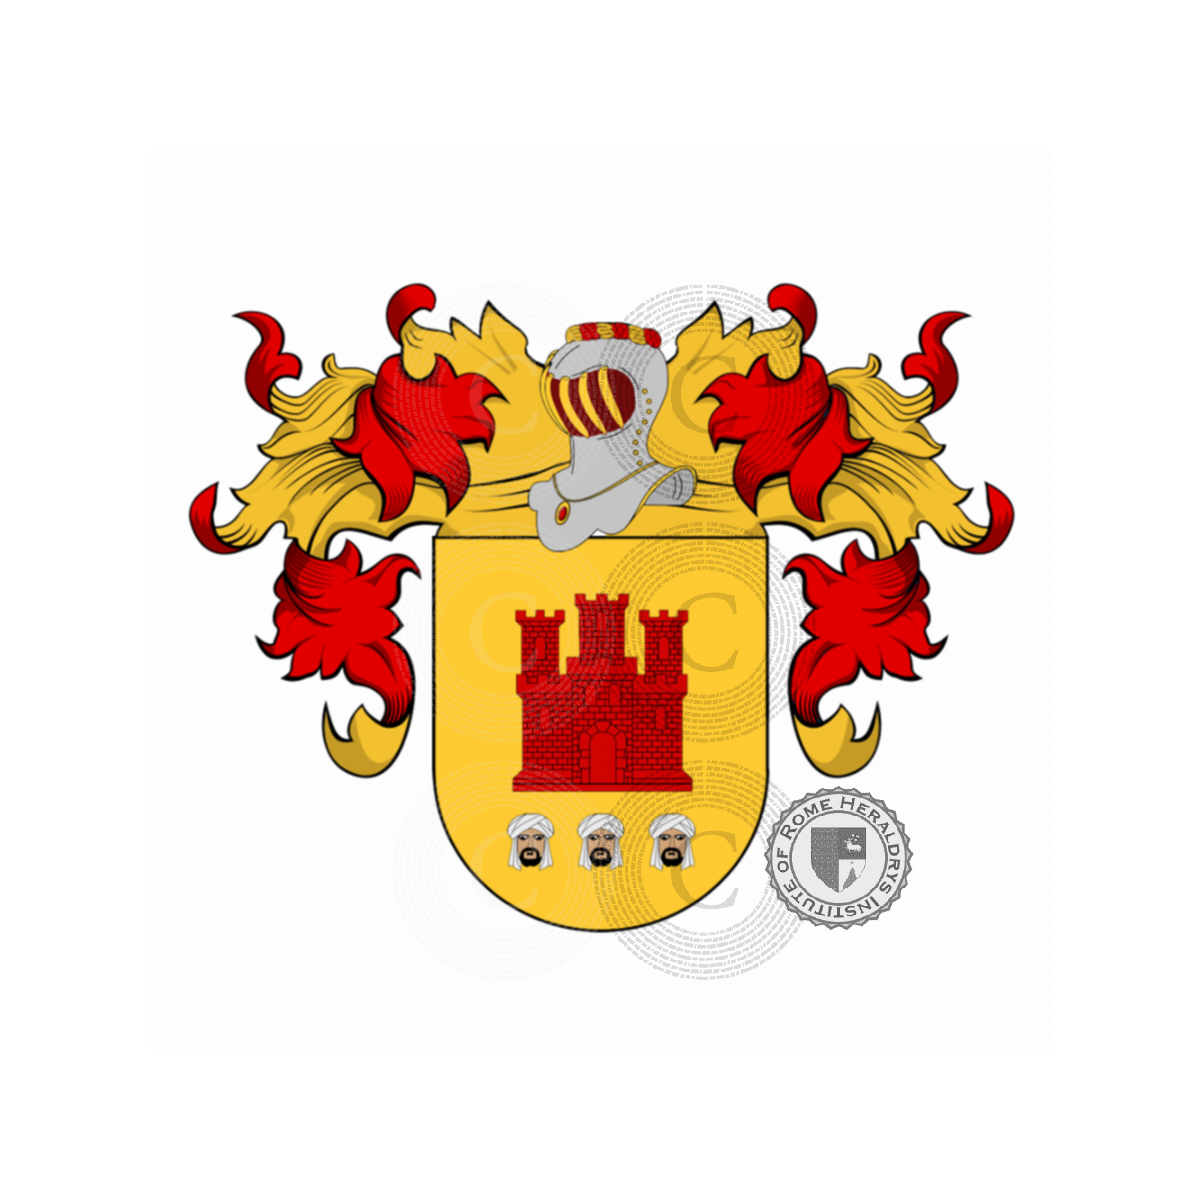 Coat of arms of familyBarra